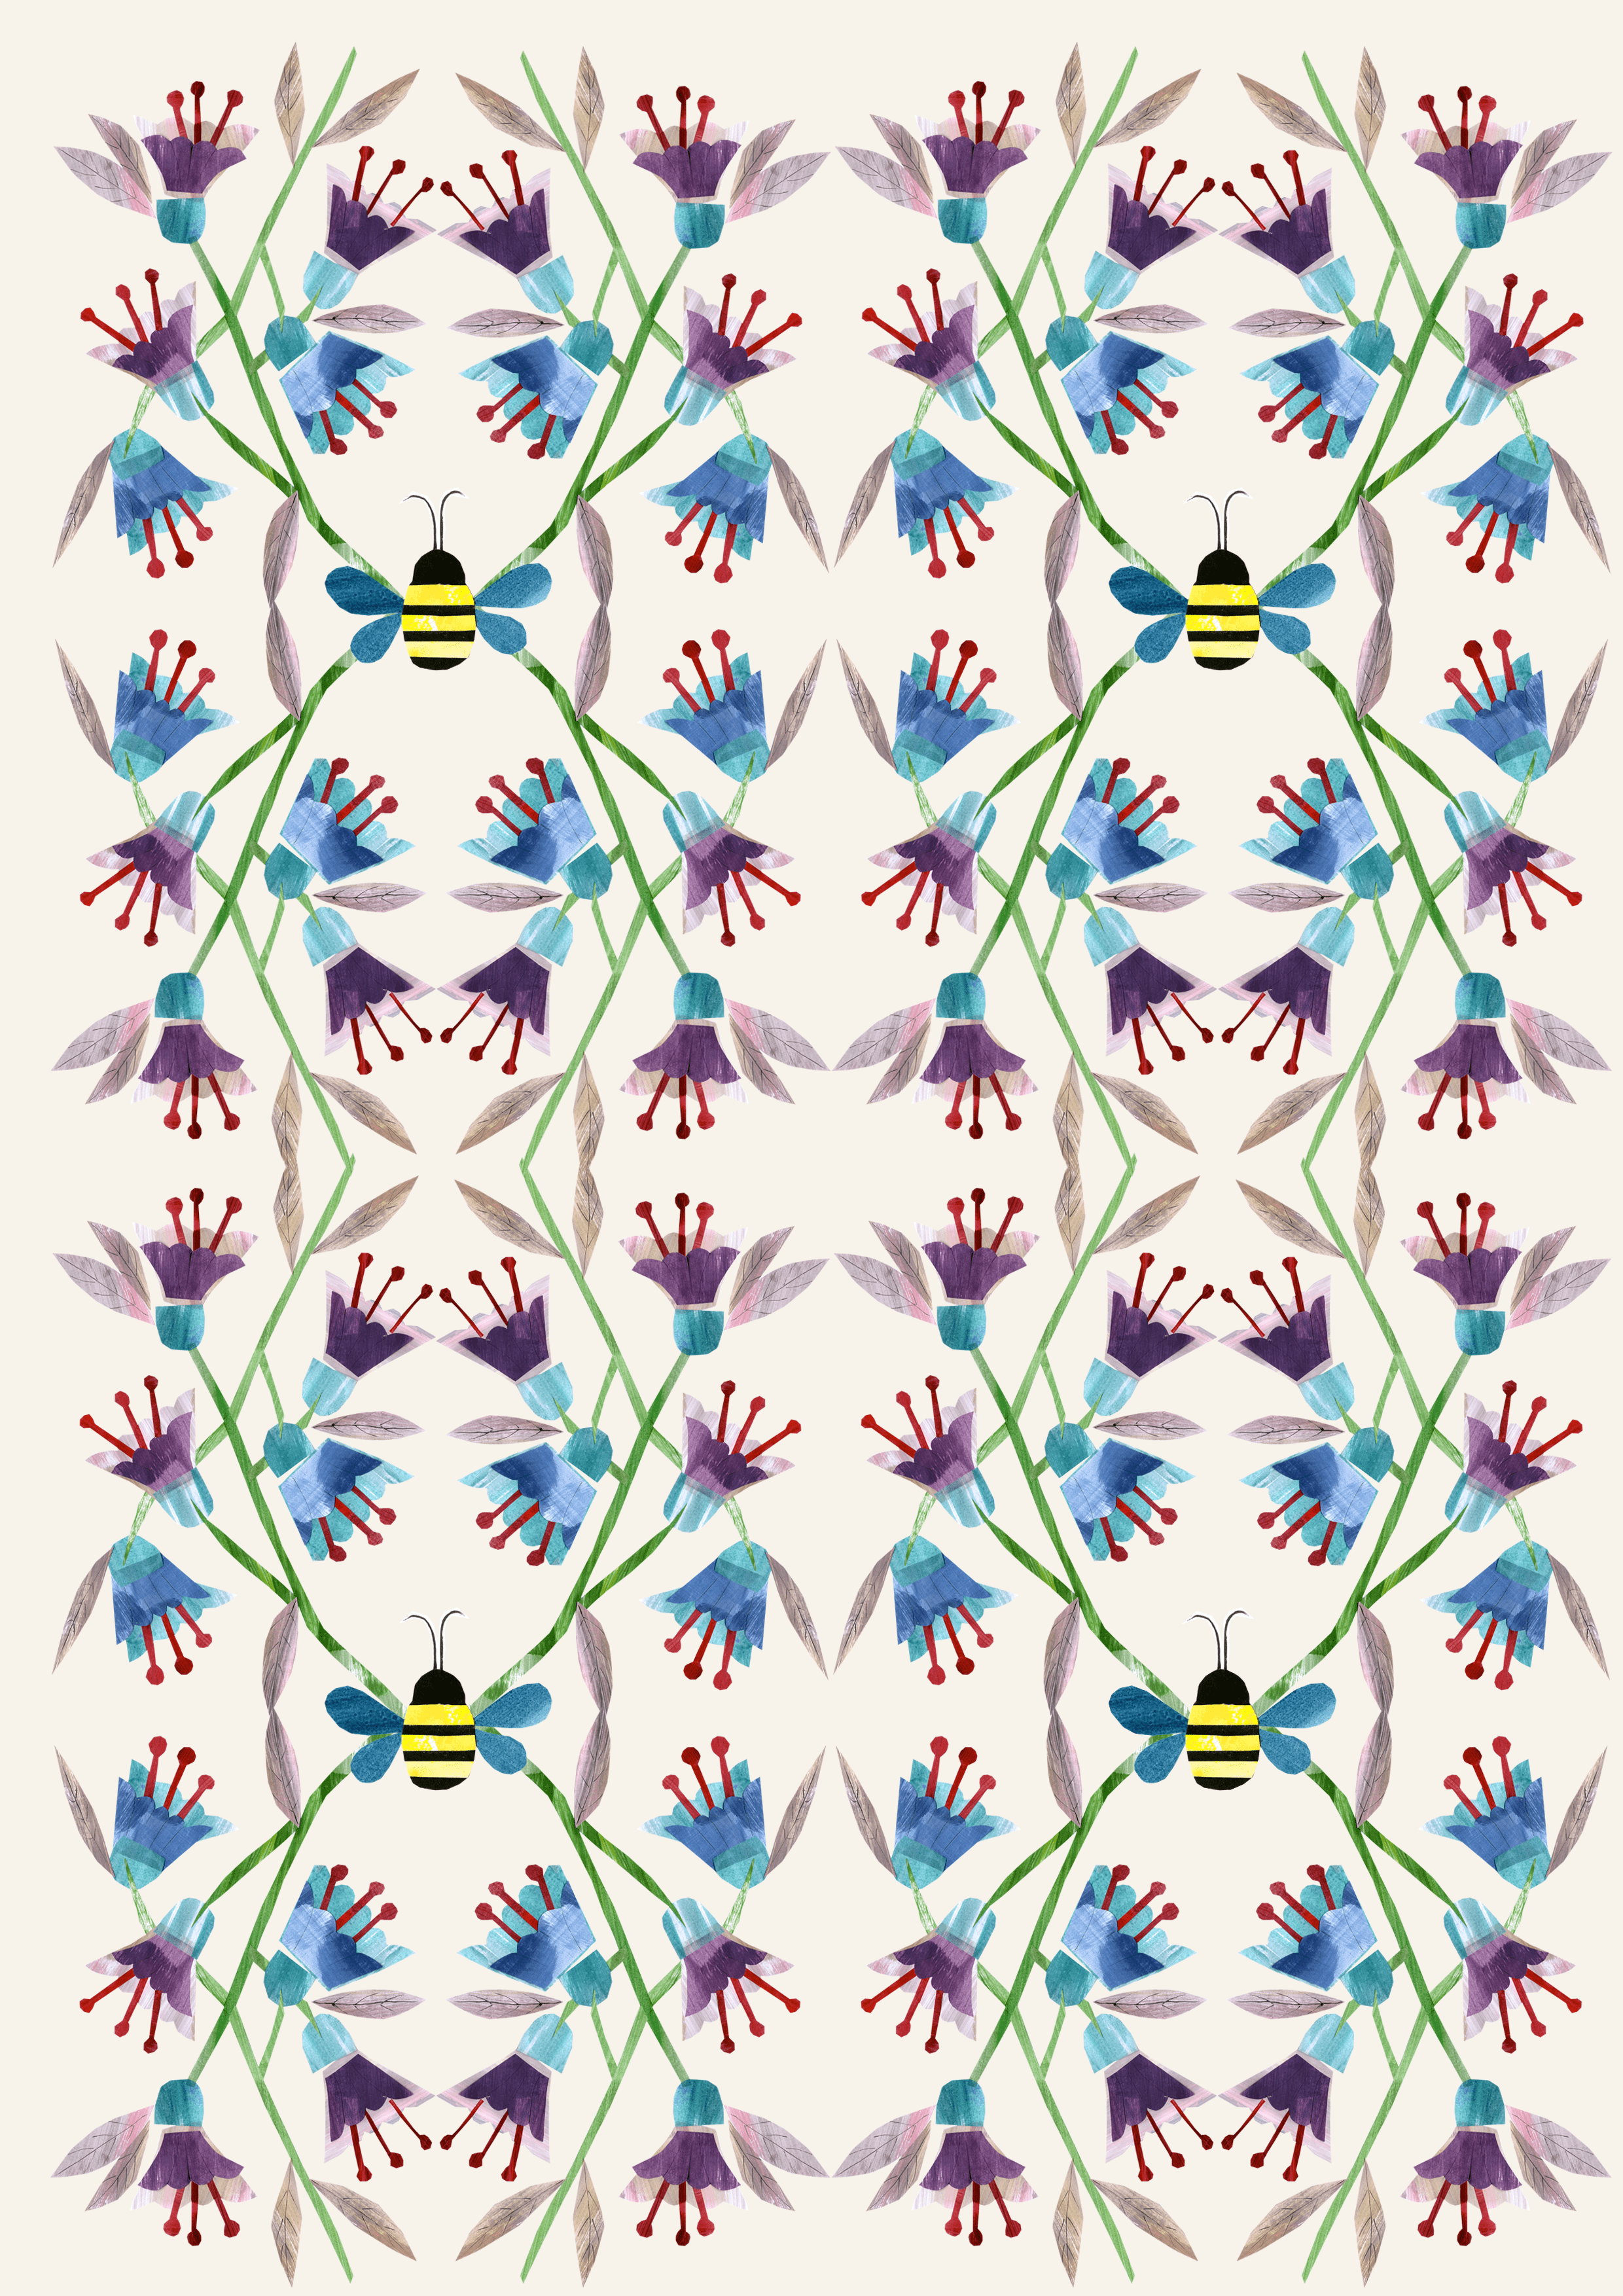 Wallpaper pattern of purple and blue flowers with bees by Hannah Dee